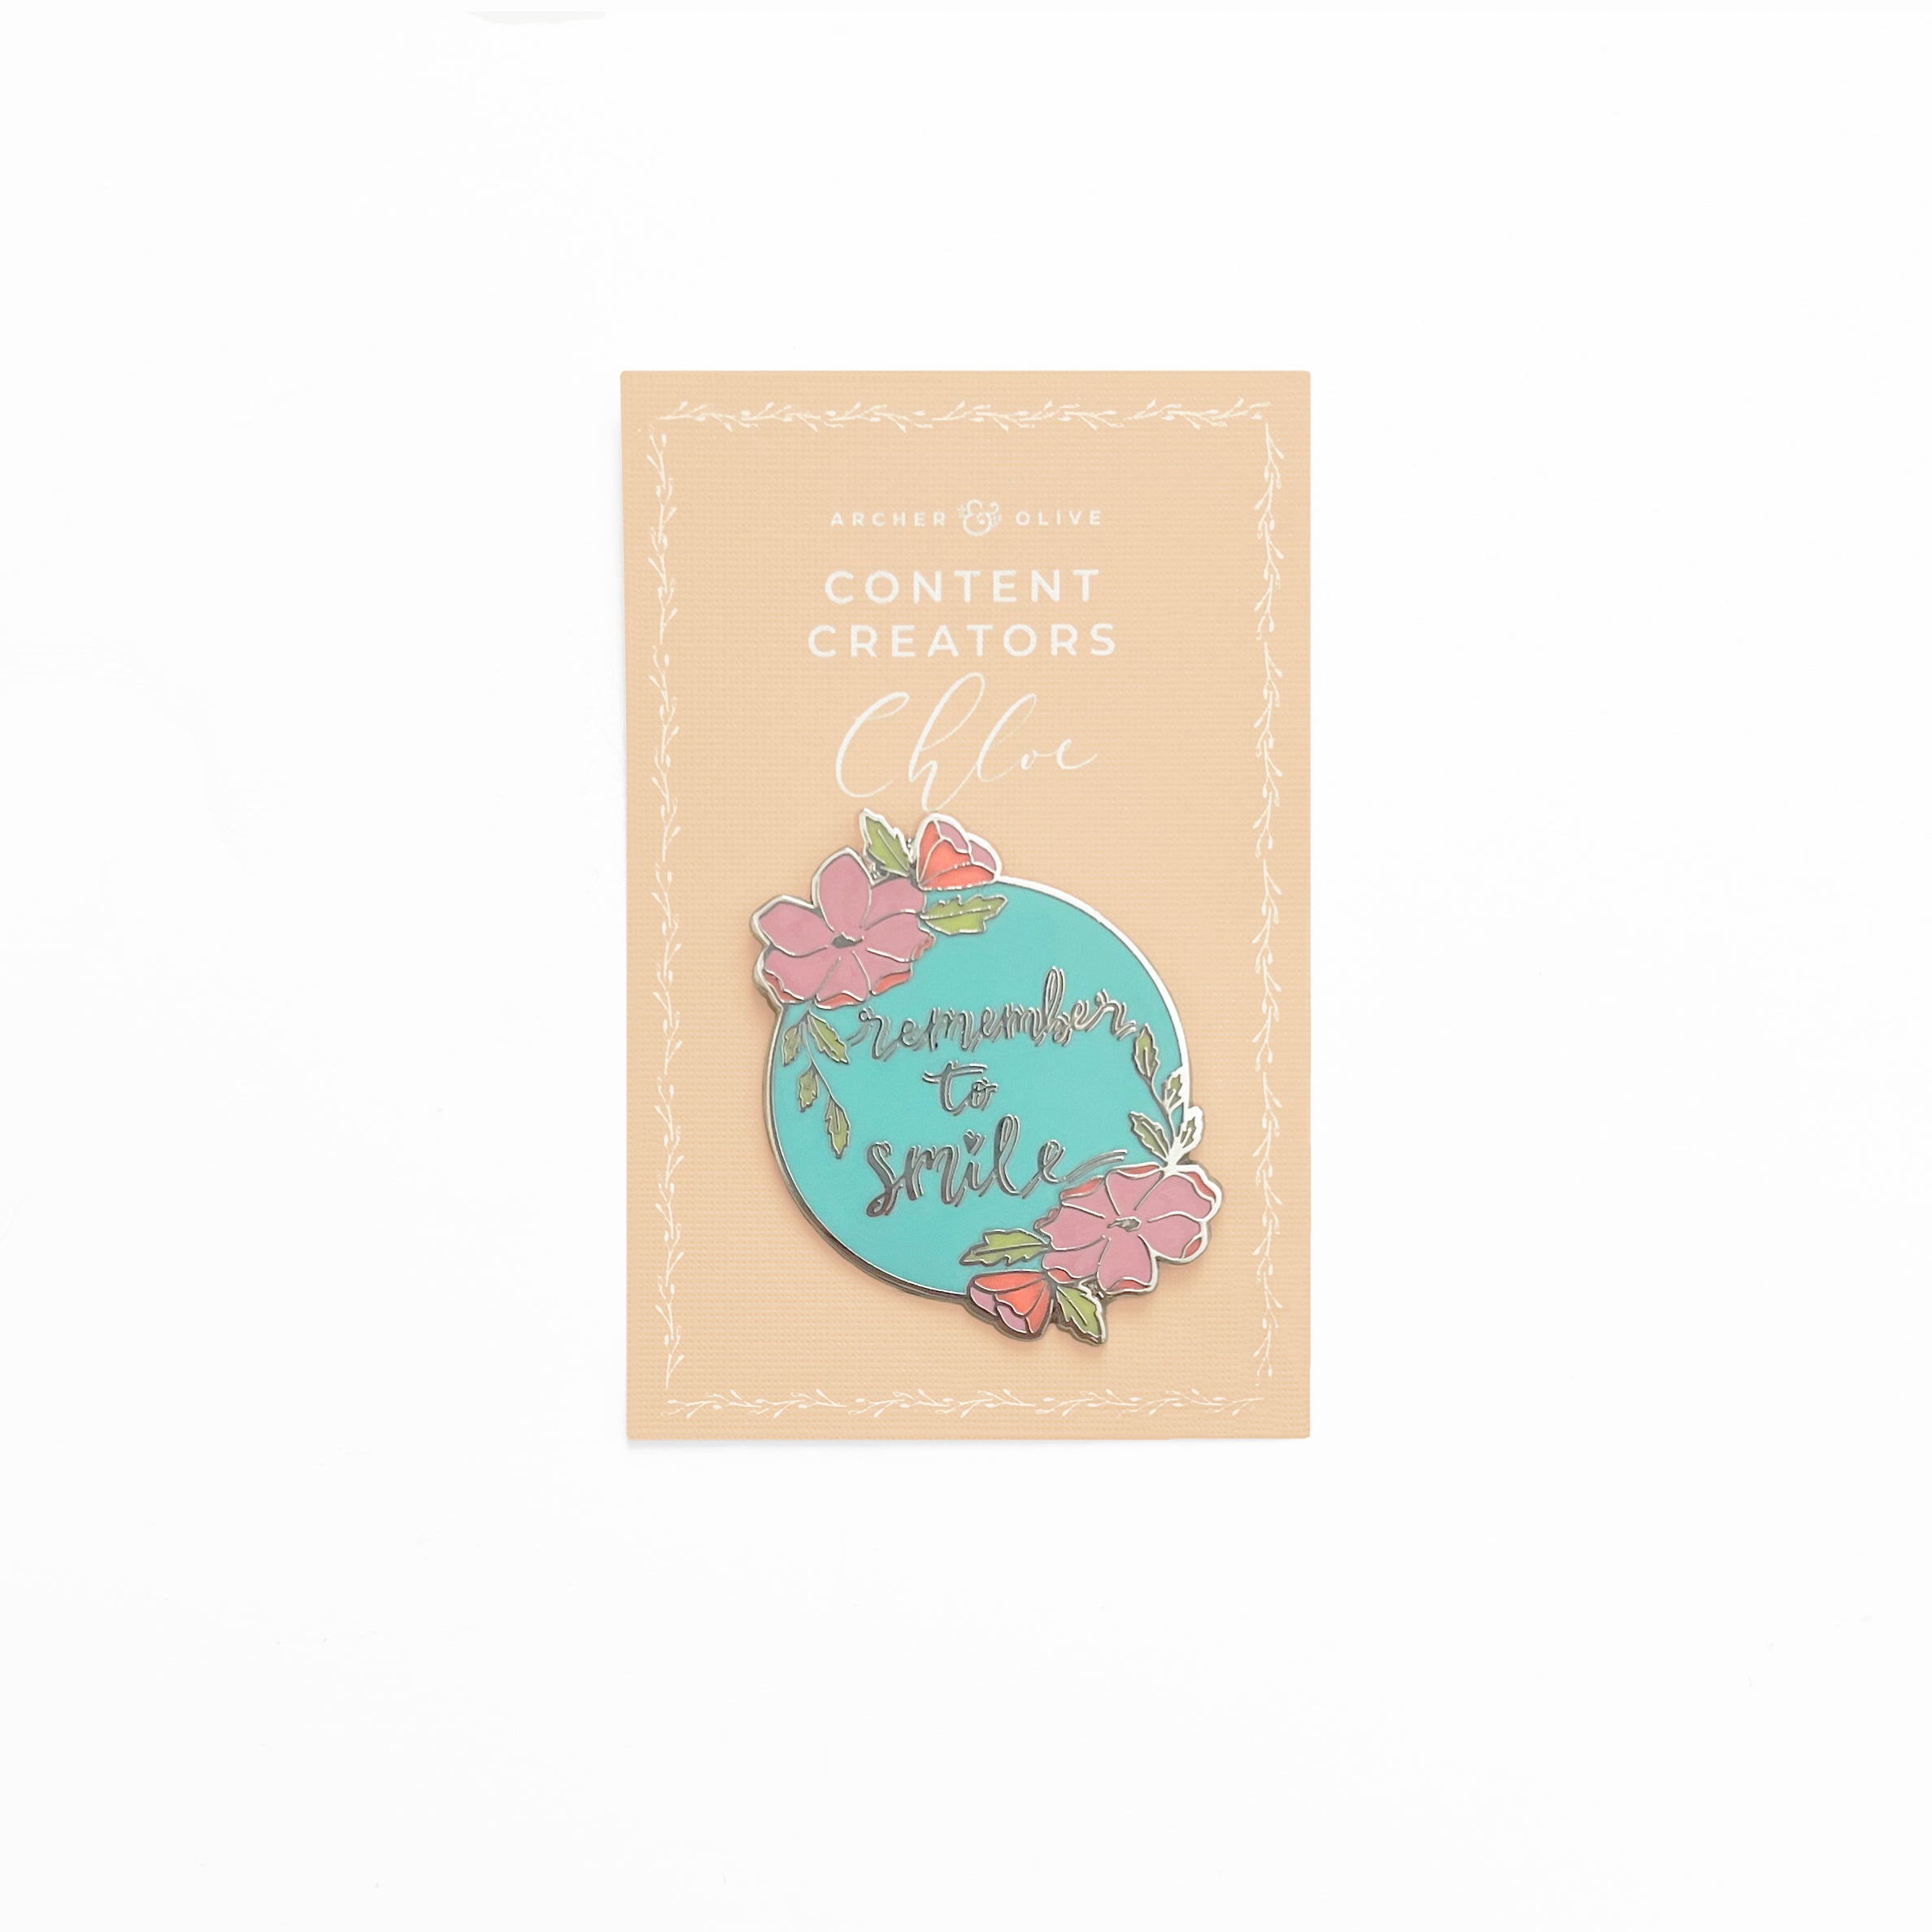 Collector Enamel Pin: Chloe - Archer and Olive